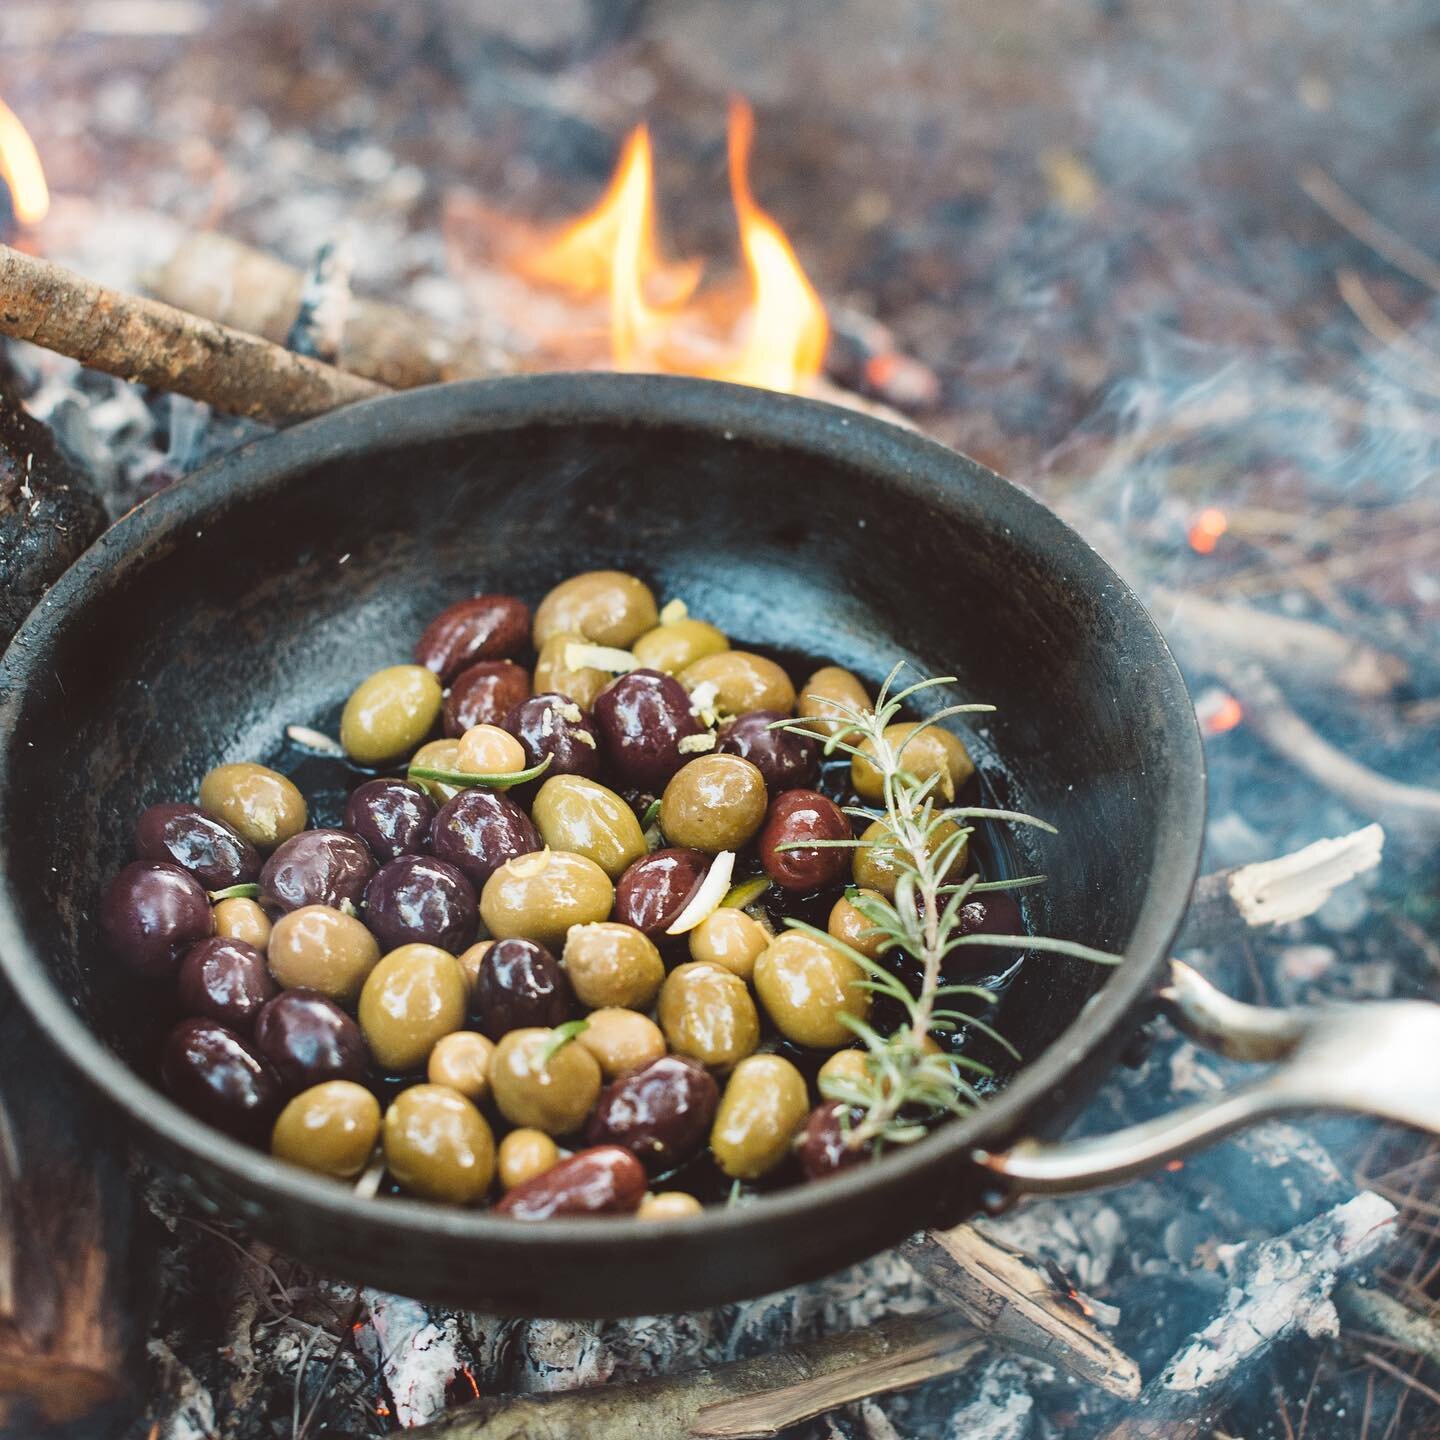 Warming the olives the old fashioned way 🔥#mixedolives #warmolives #olivelover